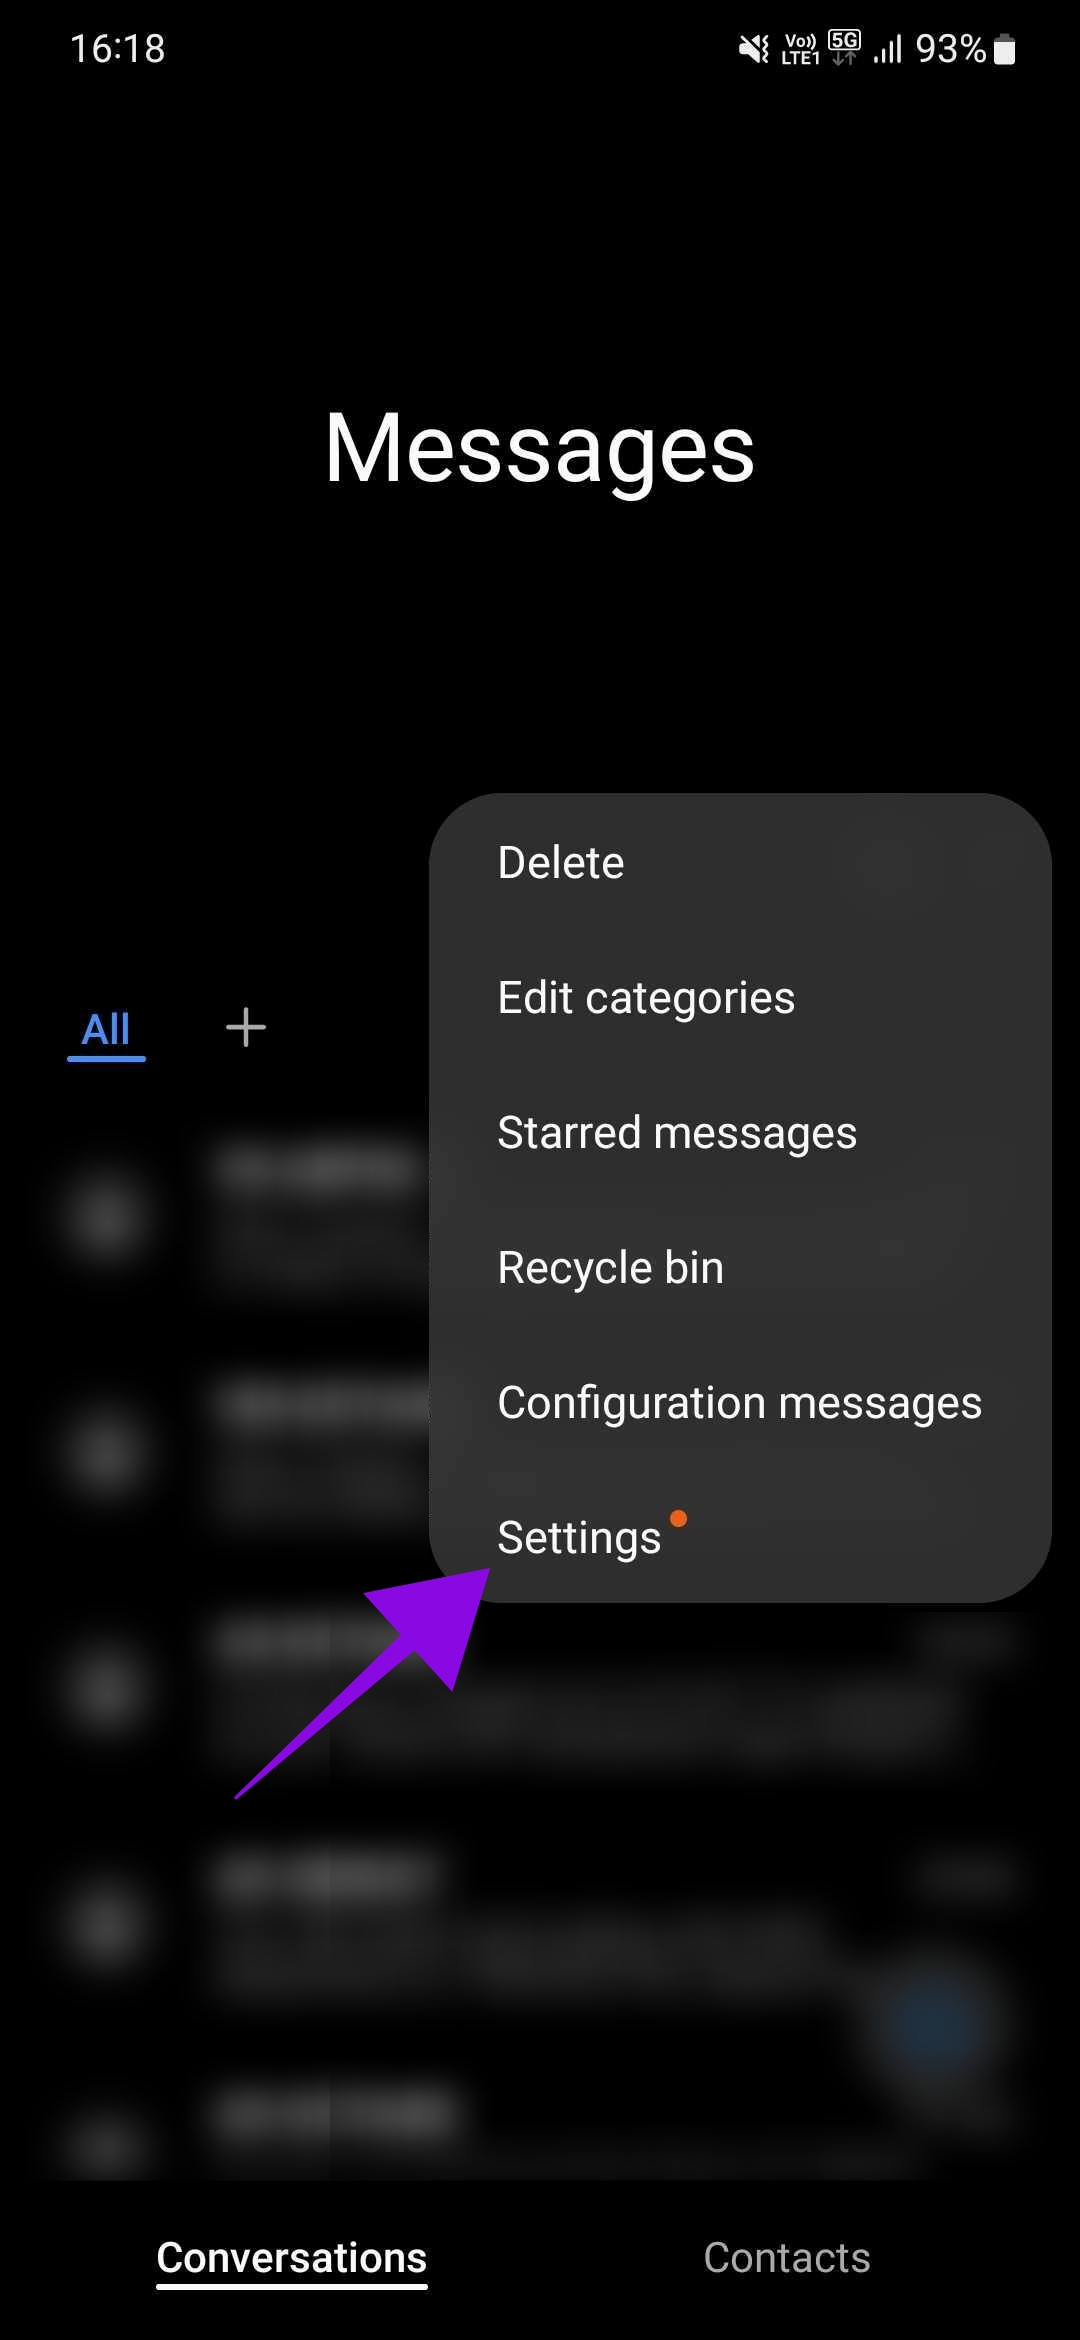 tap the three dots and choose Settings